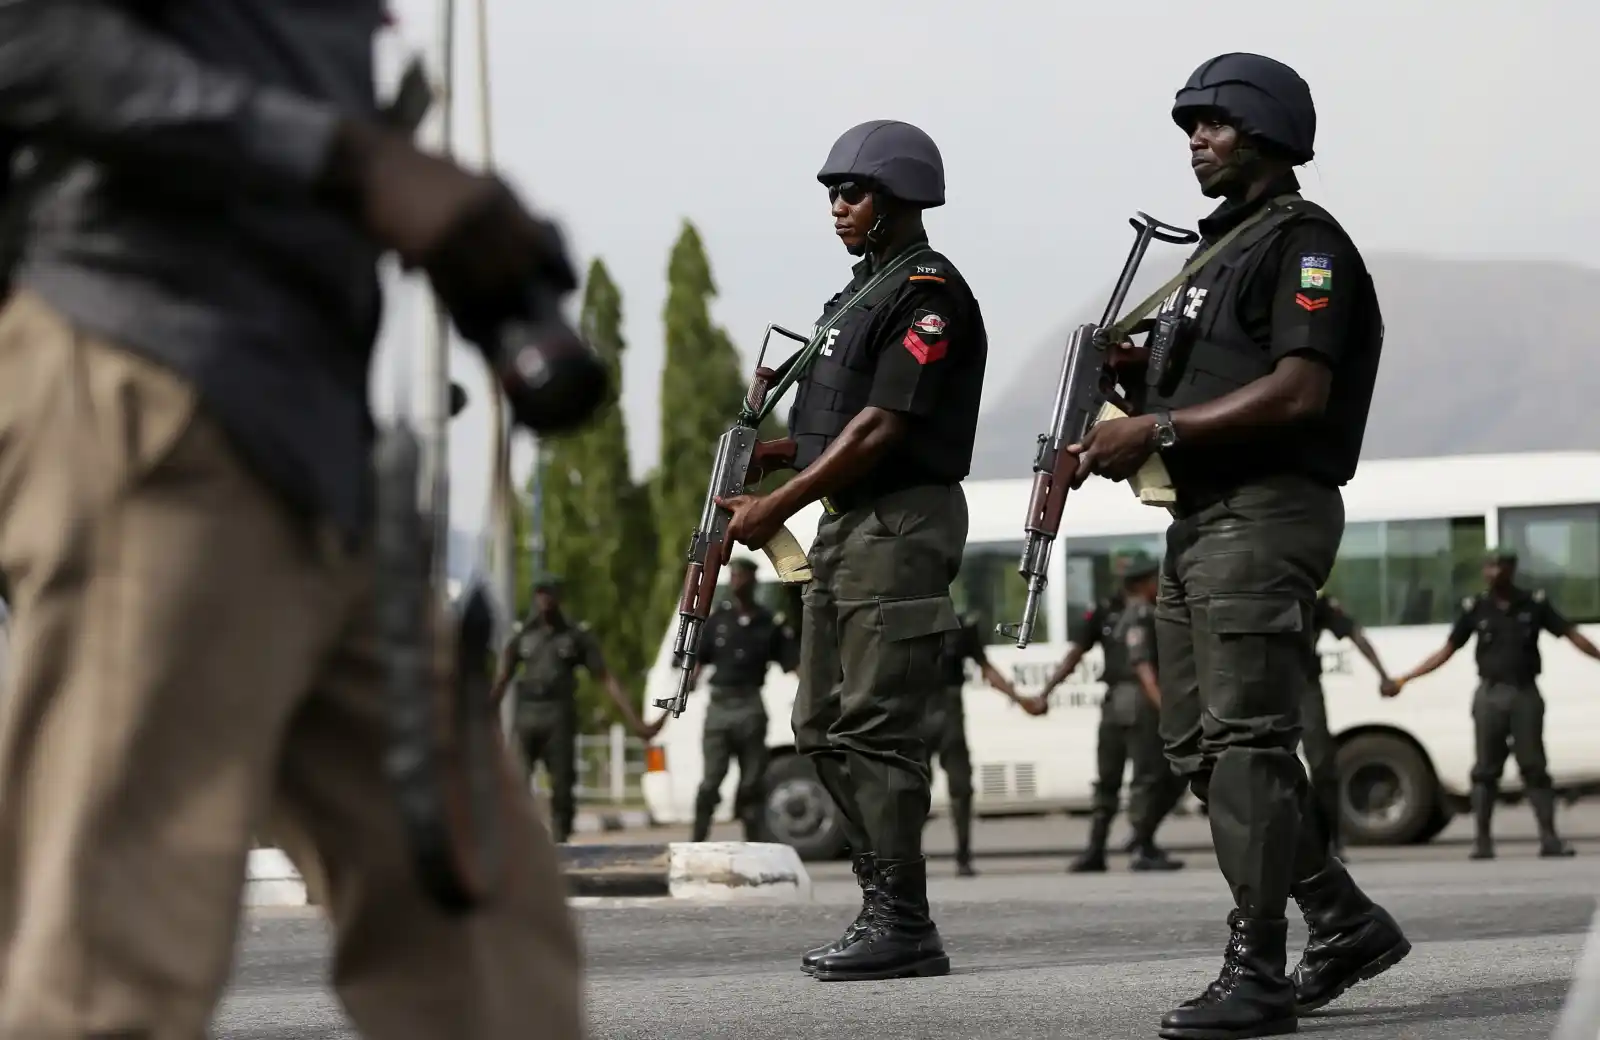 hatred-for-nigerian-police-is-affecting-security-police-community-relations-committee/